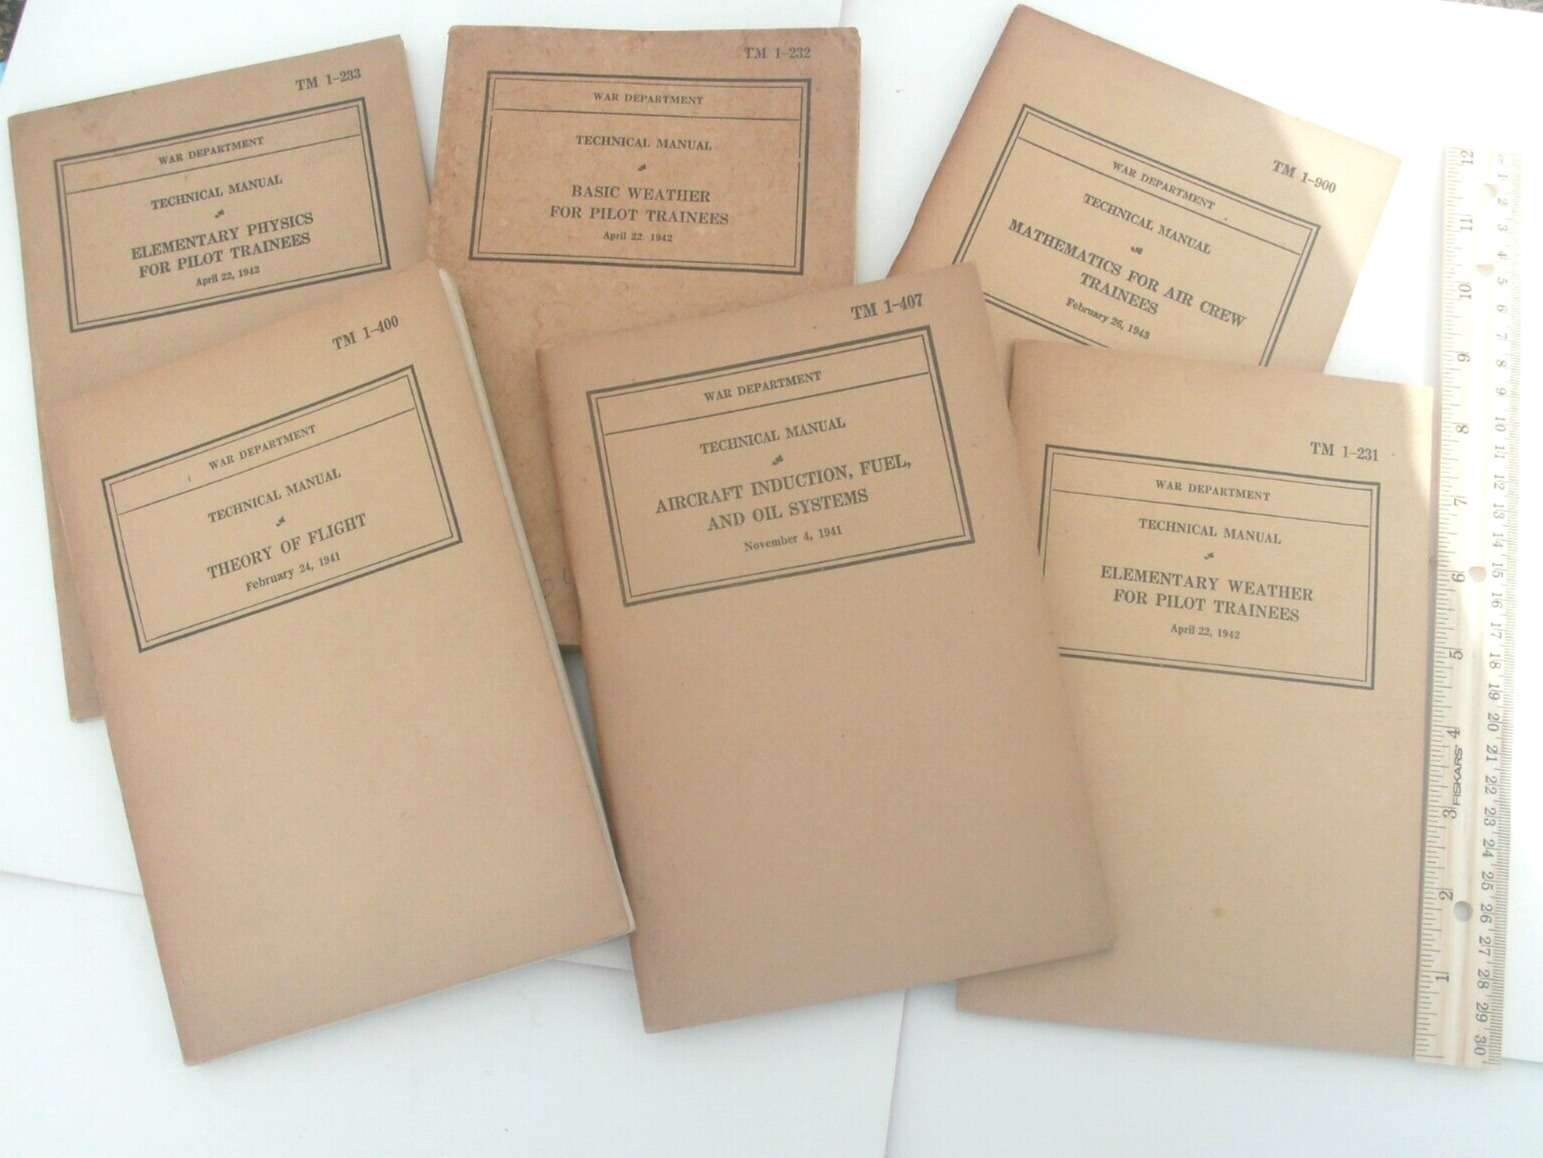 Lot of 6 War Department TMs Theory of Flight and 5 others 1941 - 1943